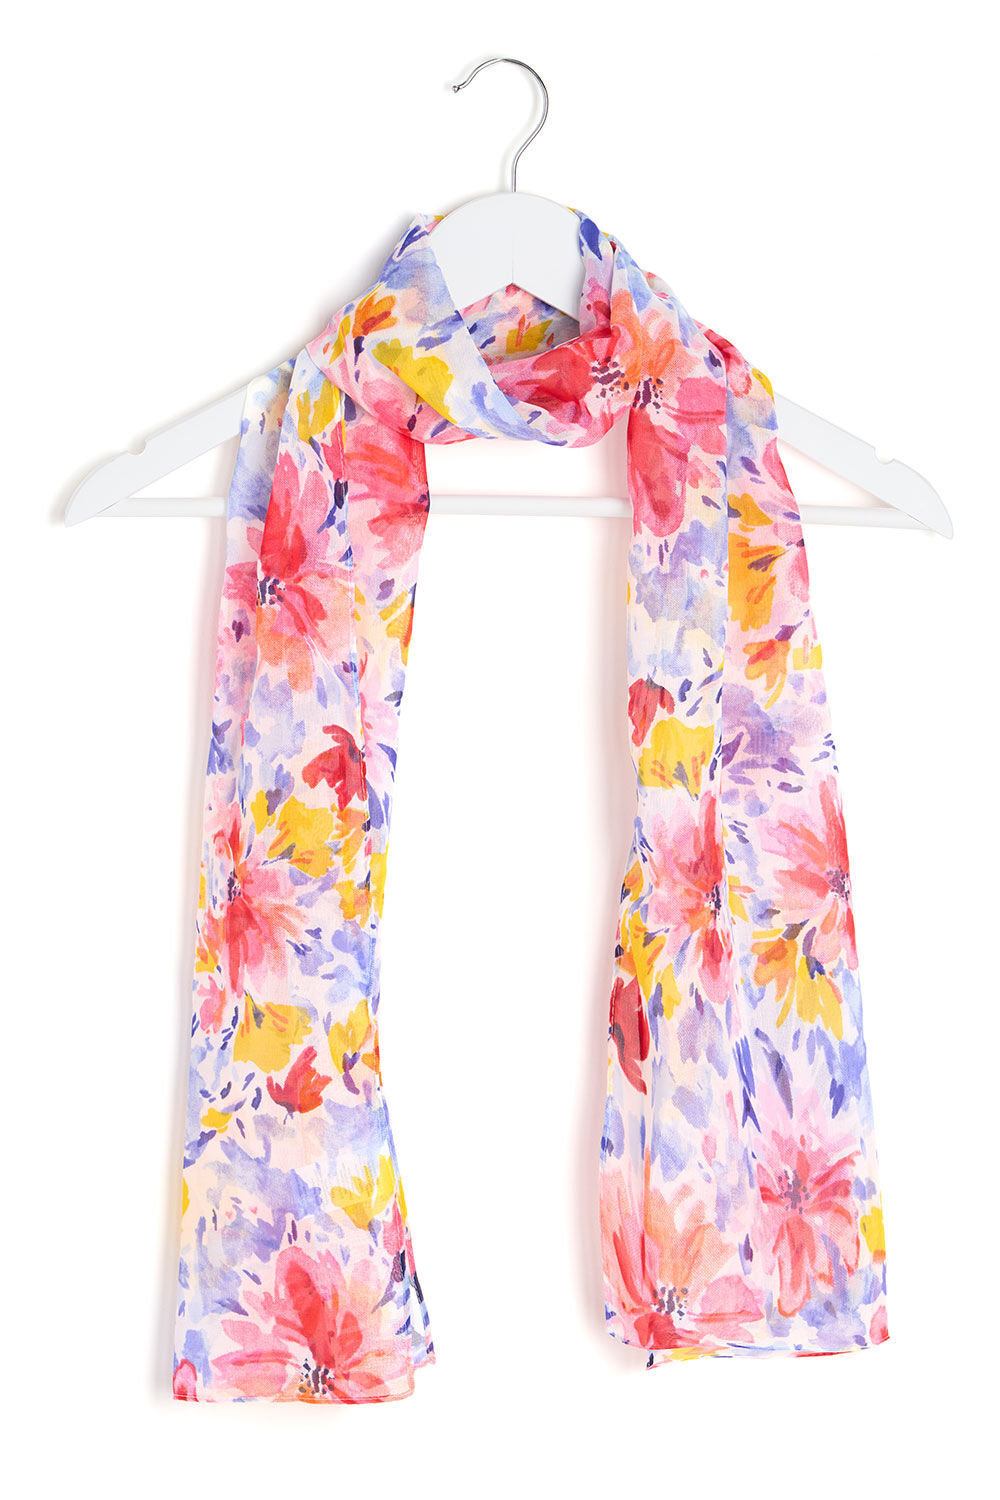 Bonmarche Pink Watercolour Floral Print Lightweight Scarf, Size: One Size